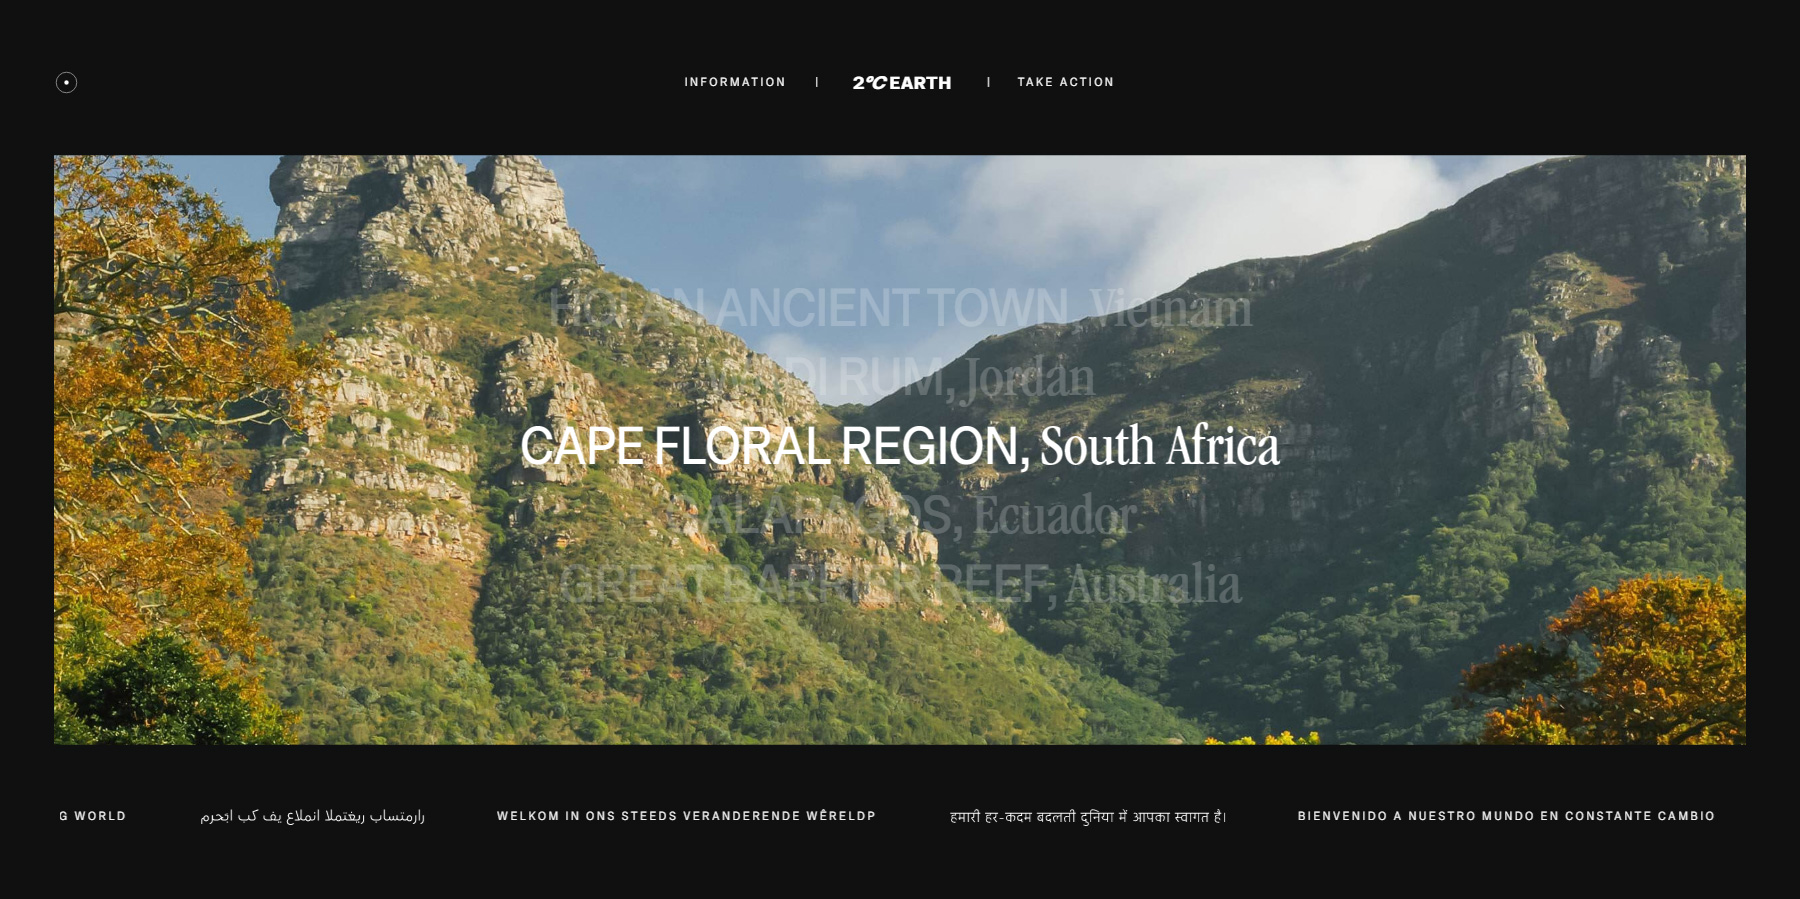 2°C EARTH - Website of the Day